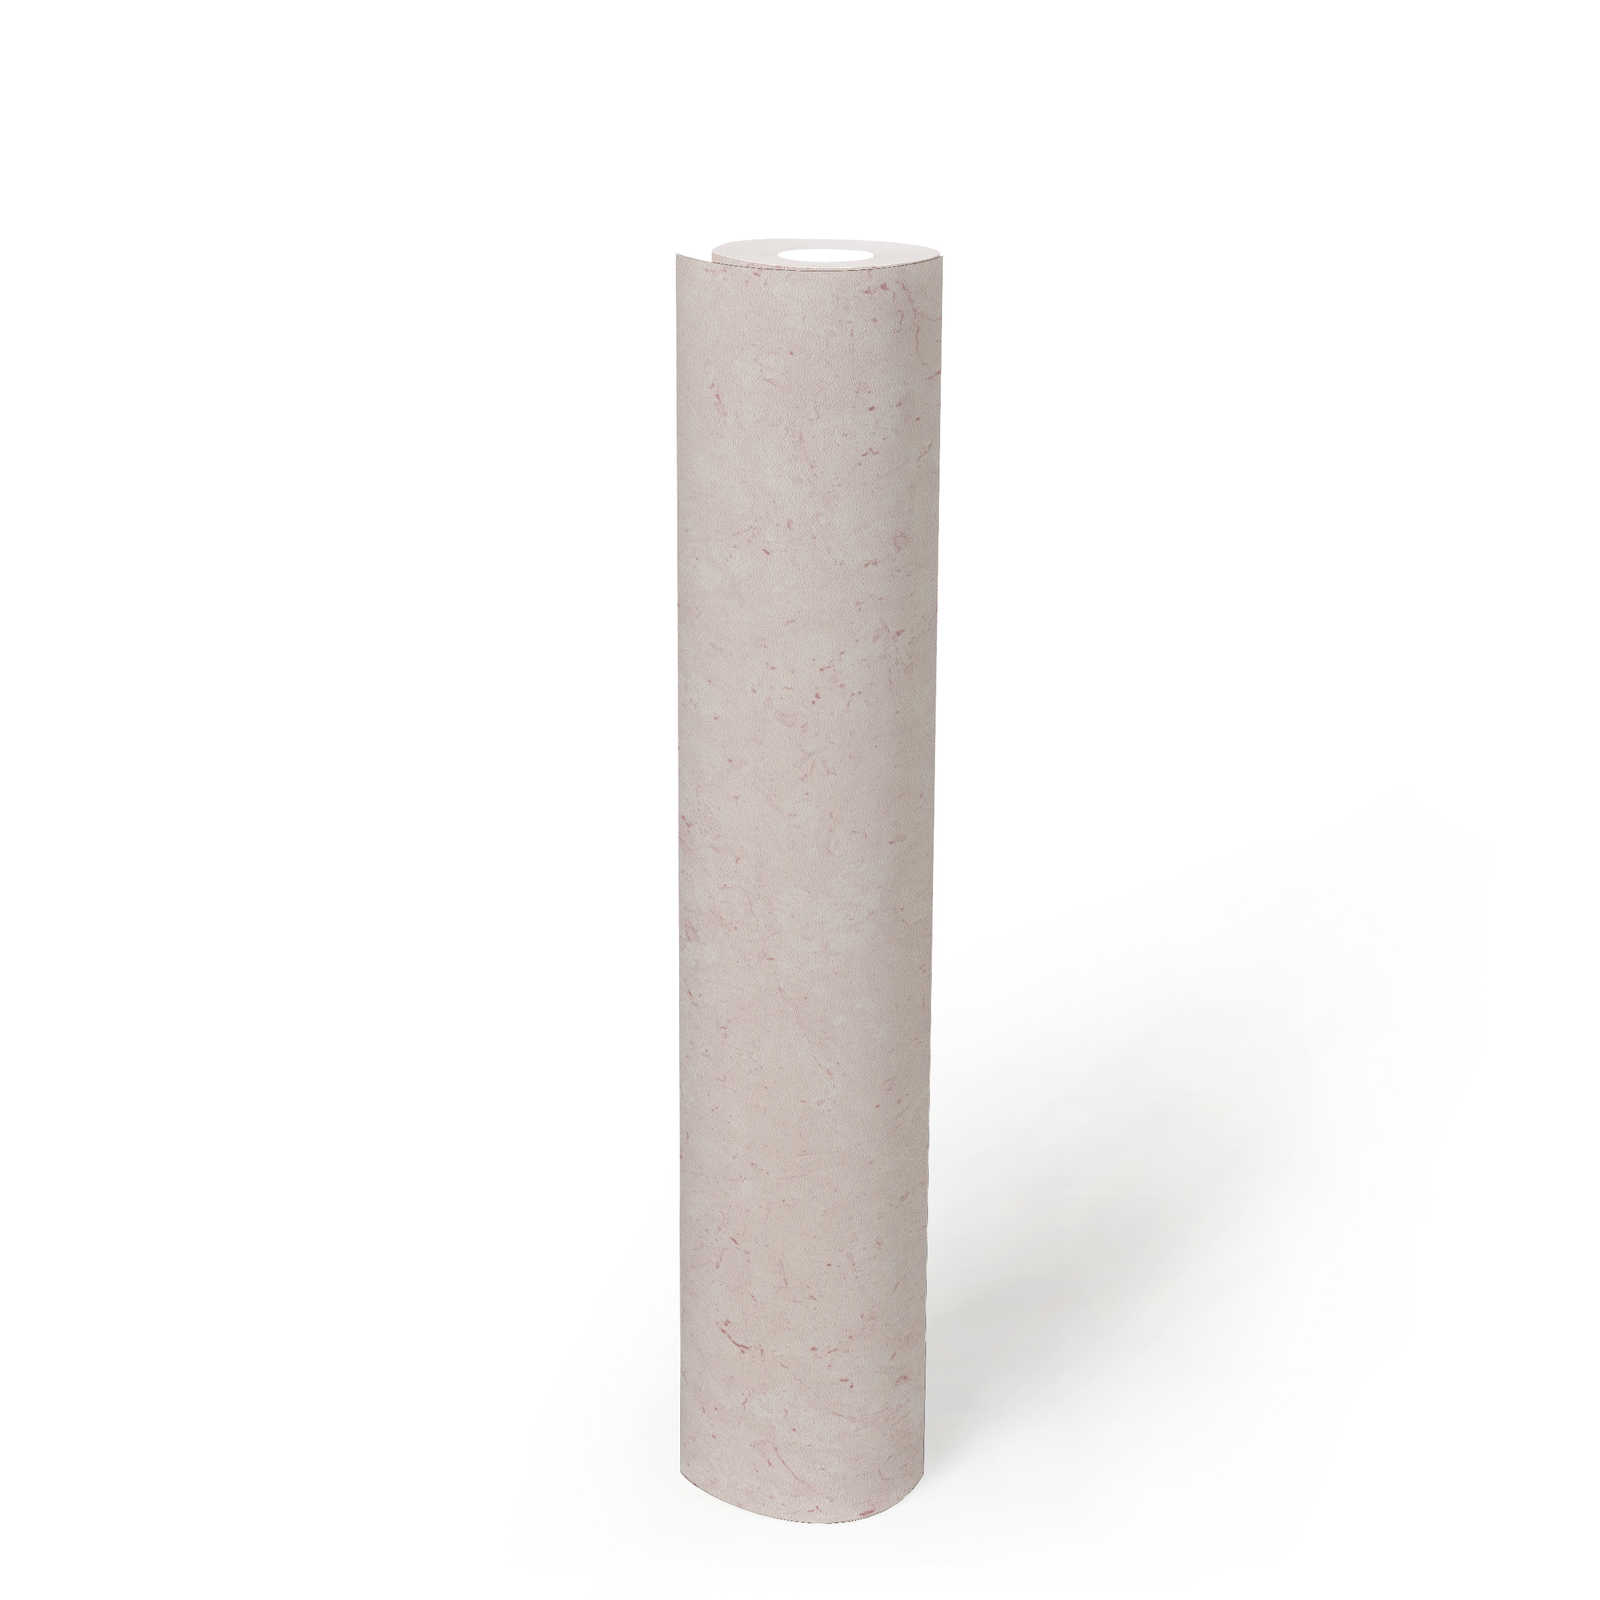             Textured pattern wallpaper plain, with concrete look - pink
        